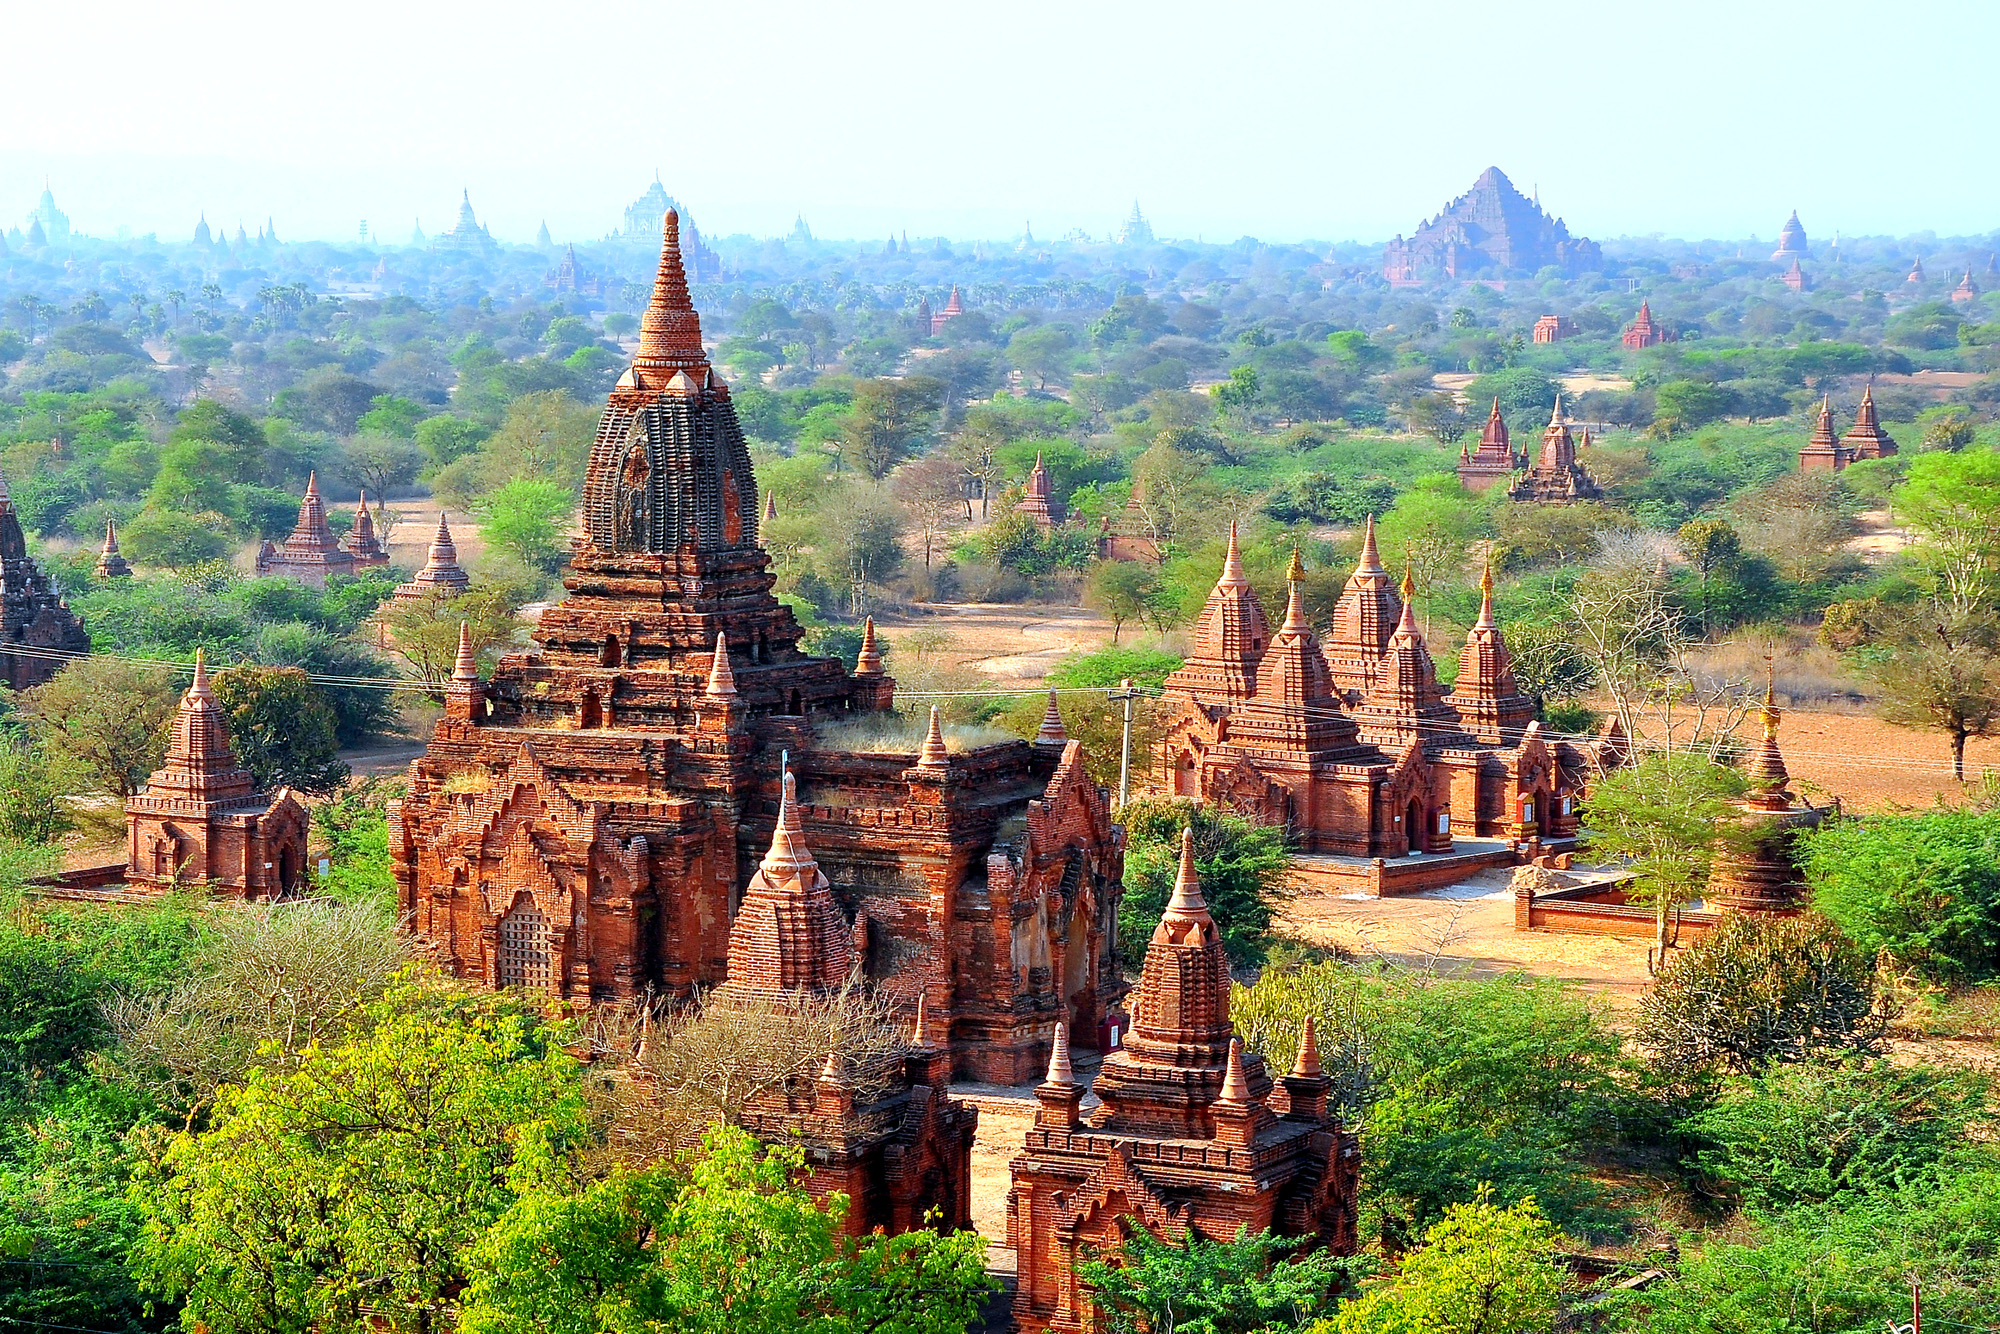 <p>Civil unrest, human rights concerns, and political instability make Myanmar a risky destination for American travelers. Besides this, there is inadequate healthcare and emergency medical resources in the country alongside landmines and unexploded ordnances. According to the US travel advisory, there are also many wrongful detentions in the country. </p>